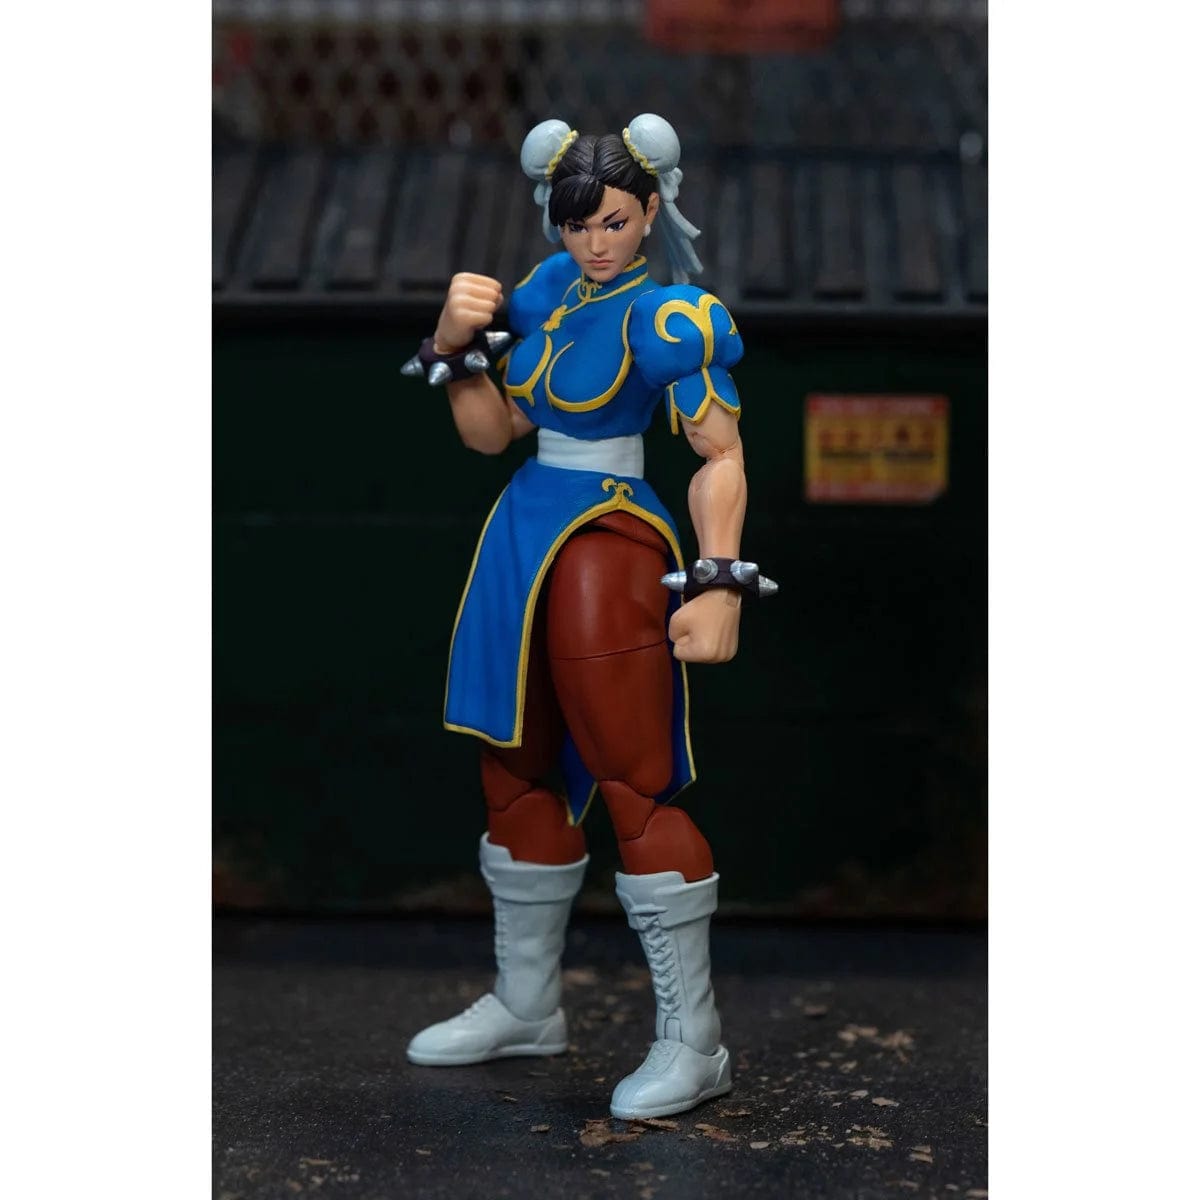 Ultra-Street-Fighter-II-Chun-Li6-Inch-Scale-Action-Figure-toys-pose-collectible.figurine